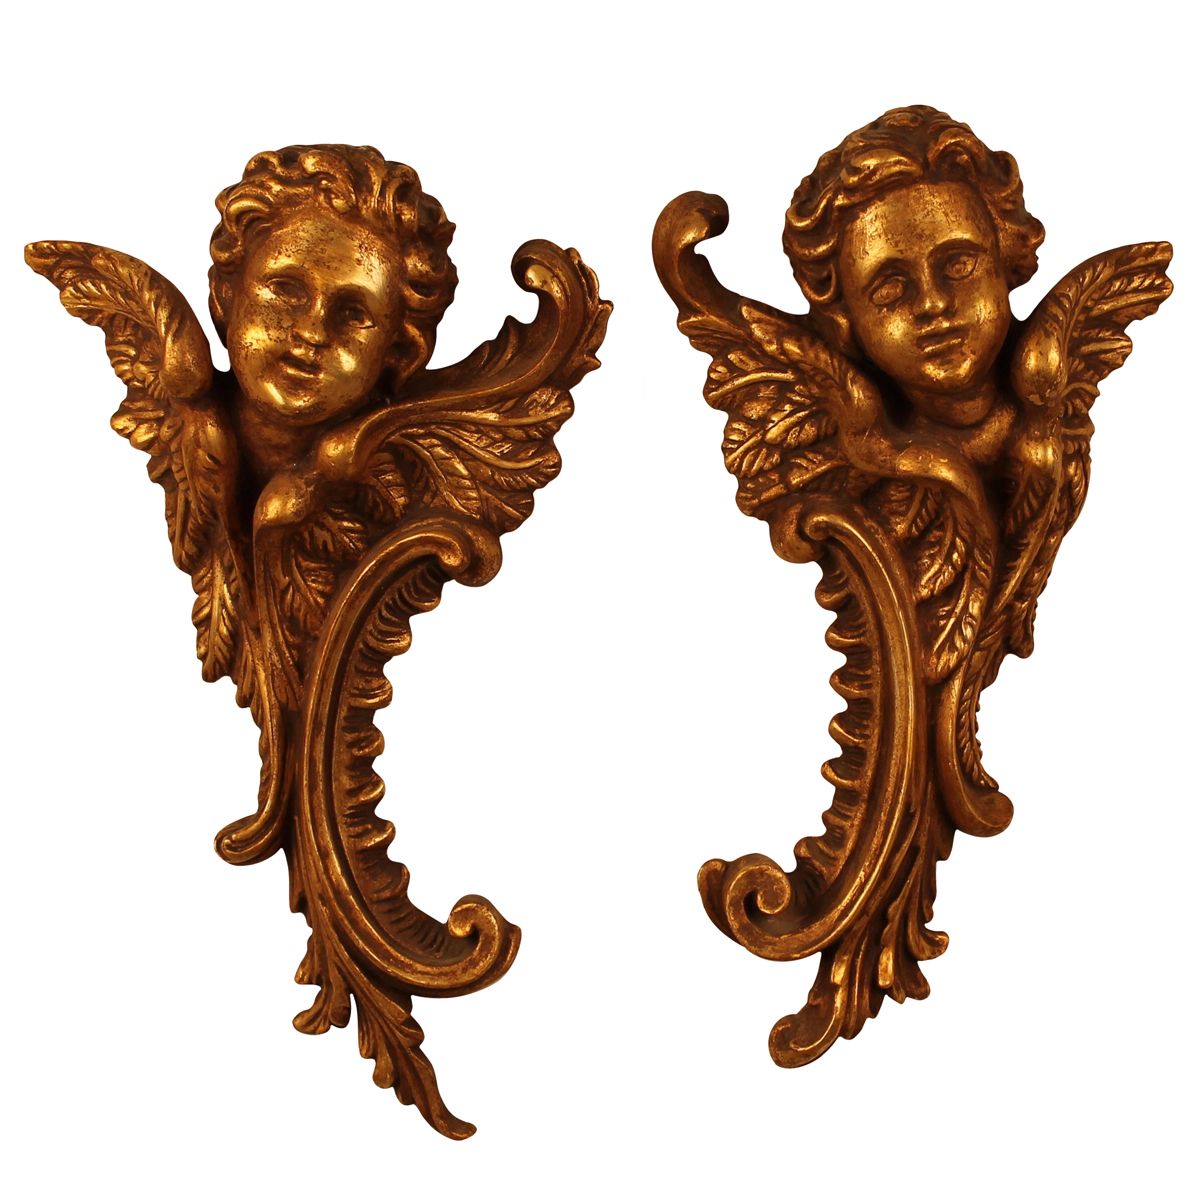 COPPIA DI PUTTI - COUPLE OF CHERUBS Carved and gilded wood. Sicily. 19th century&hellip;